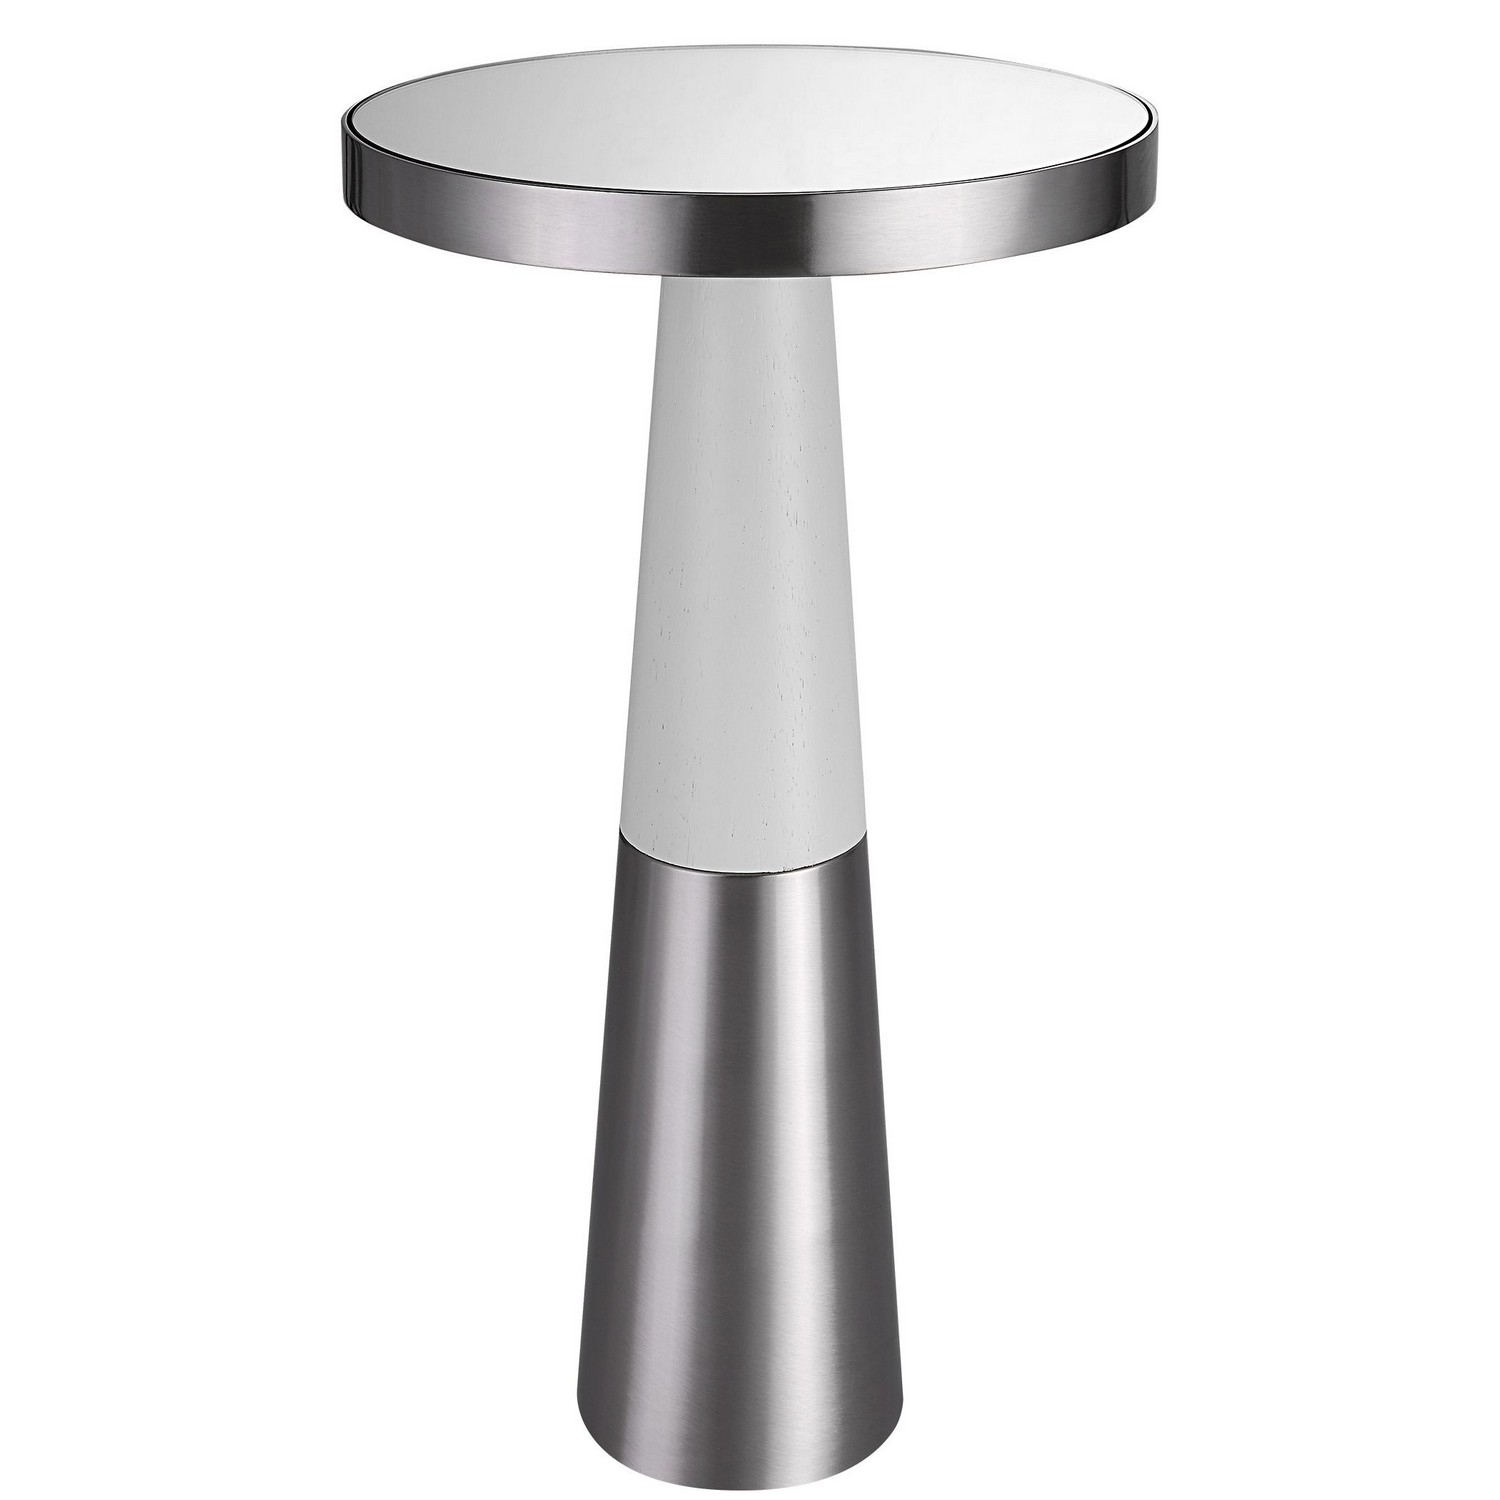 Uttermost Fortier Accent Table - Nickel